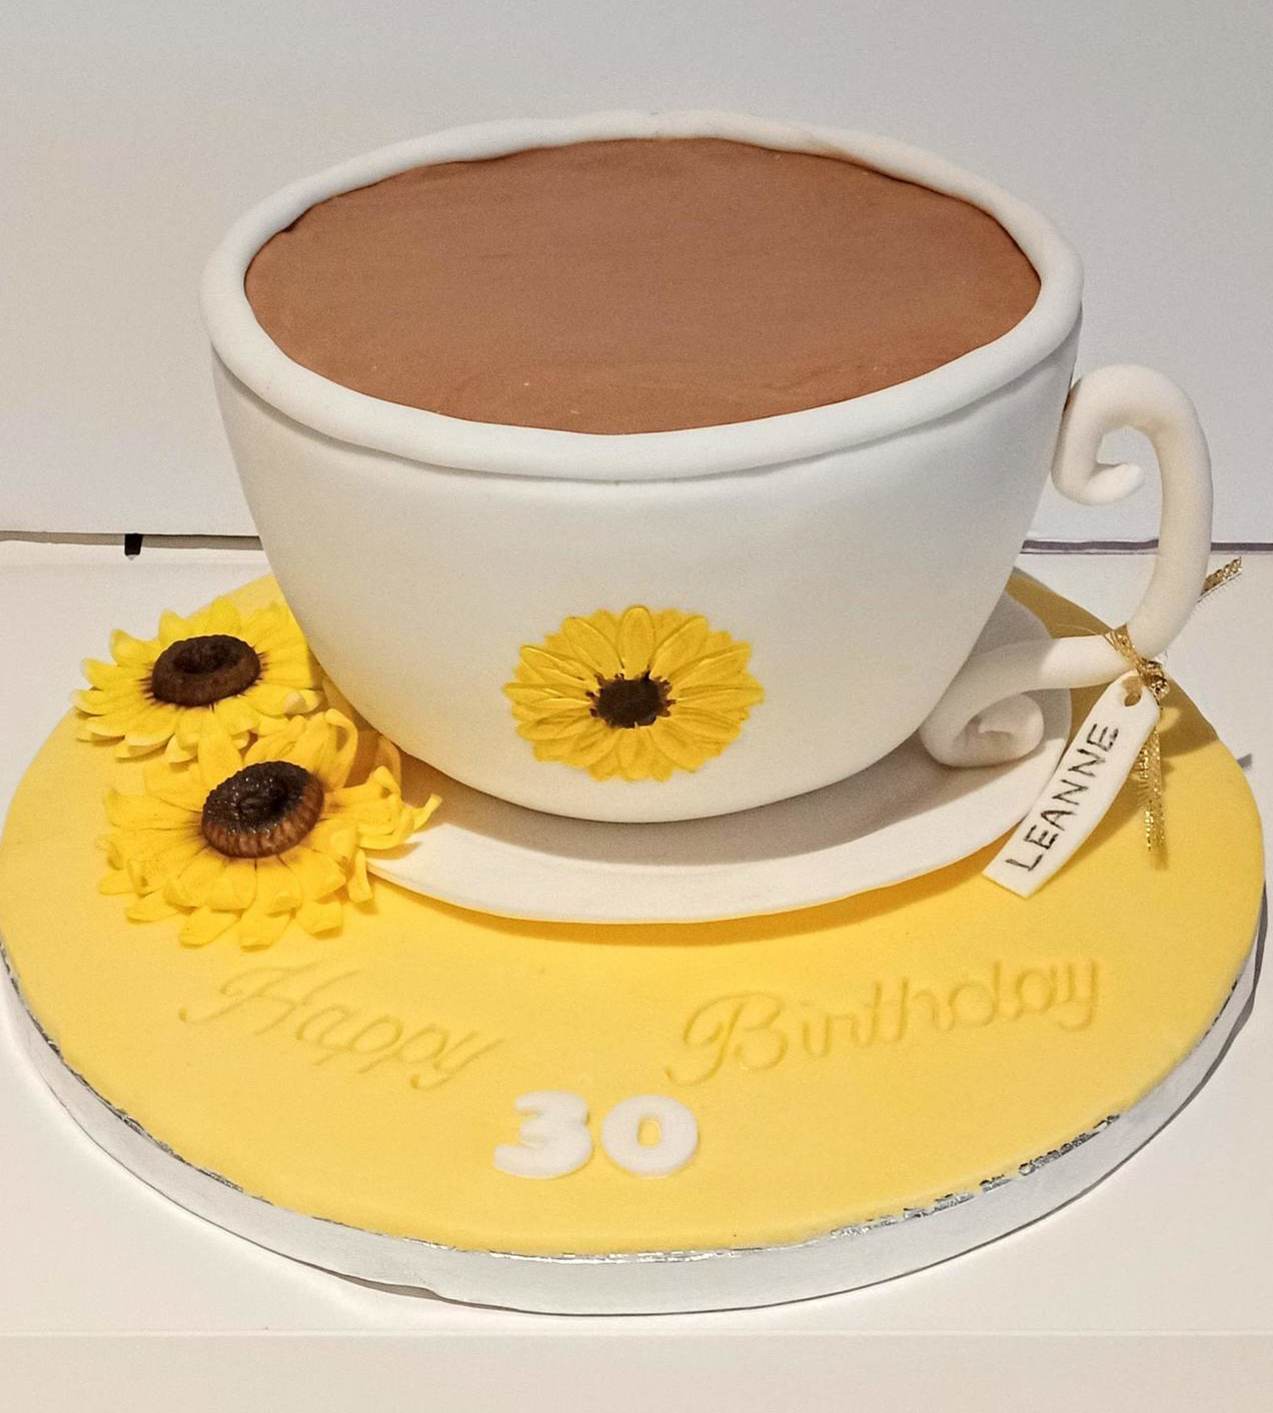 ladies 30th 3D teacup and saucer cake with sunflowers